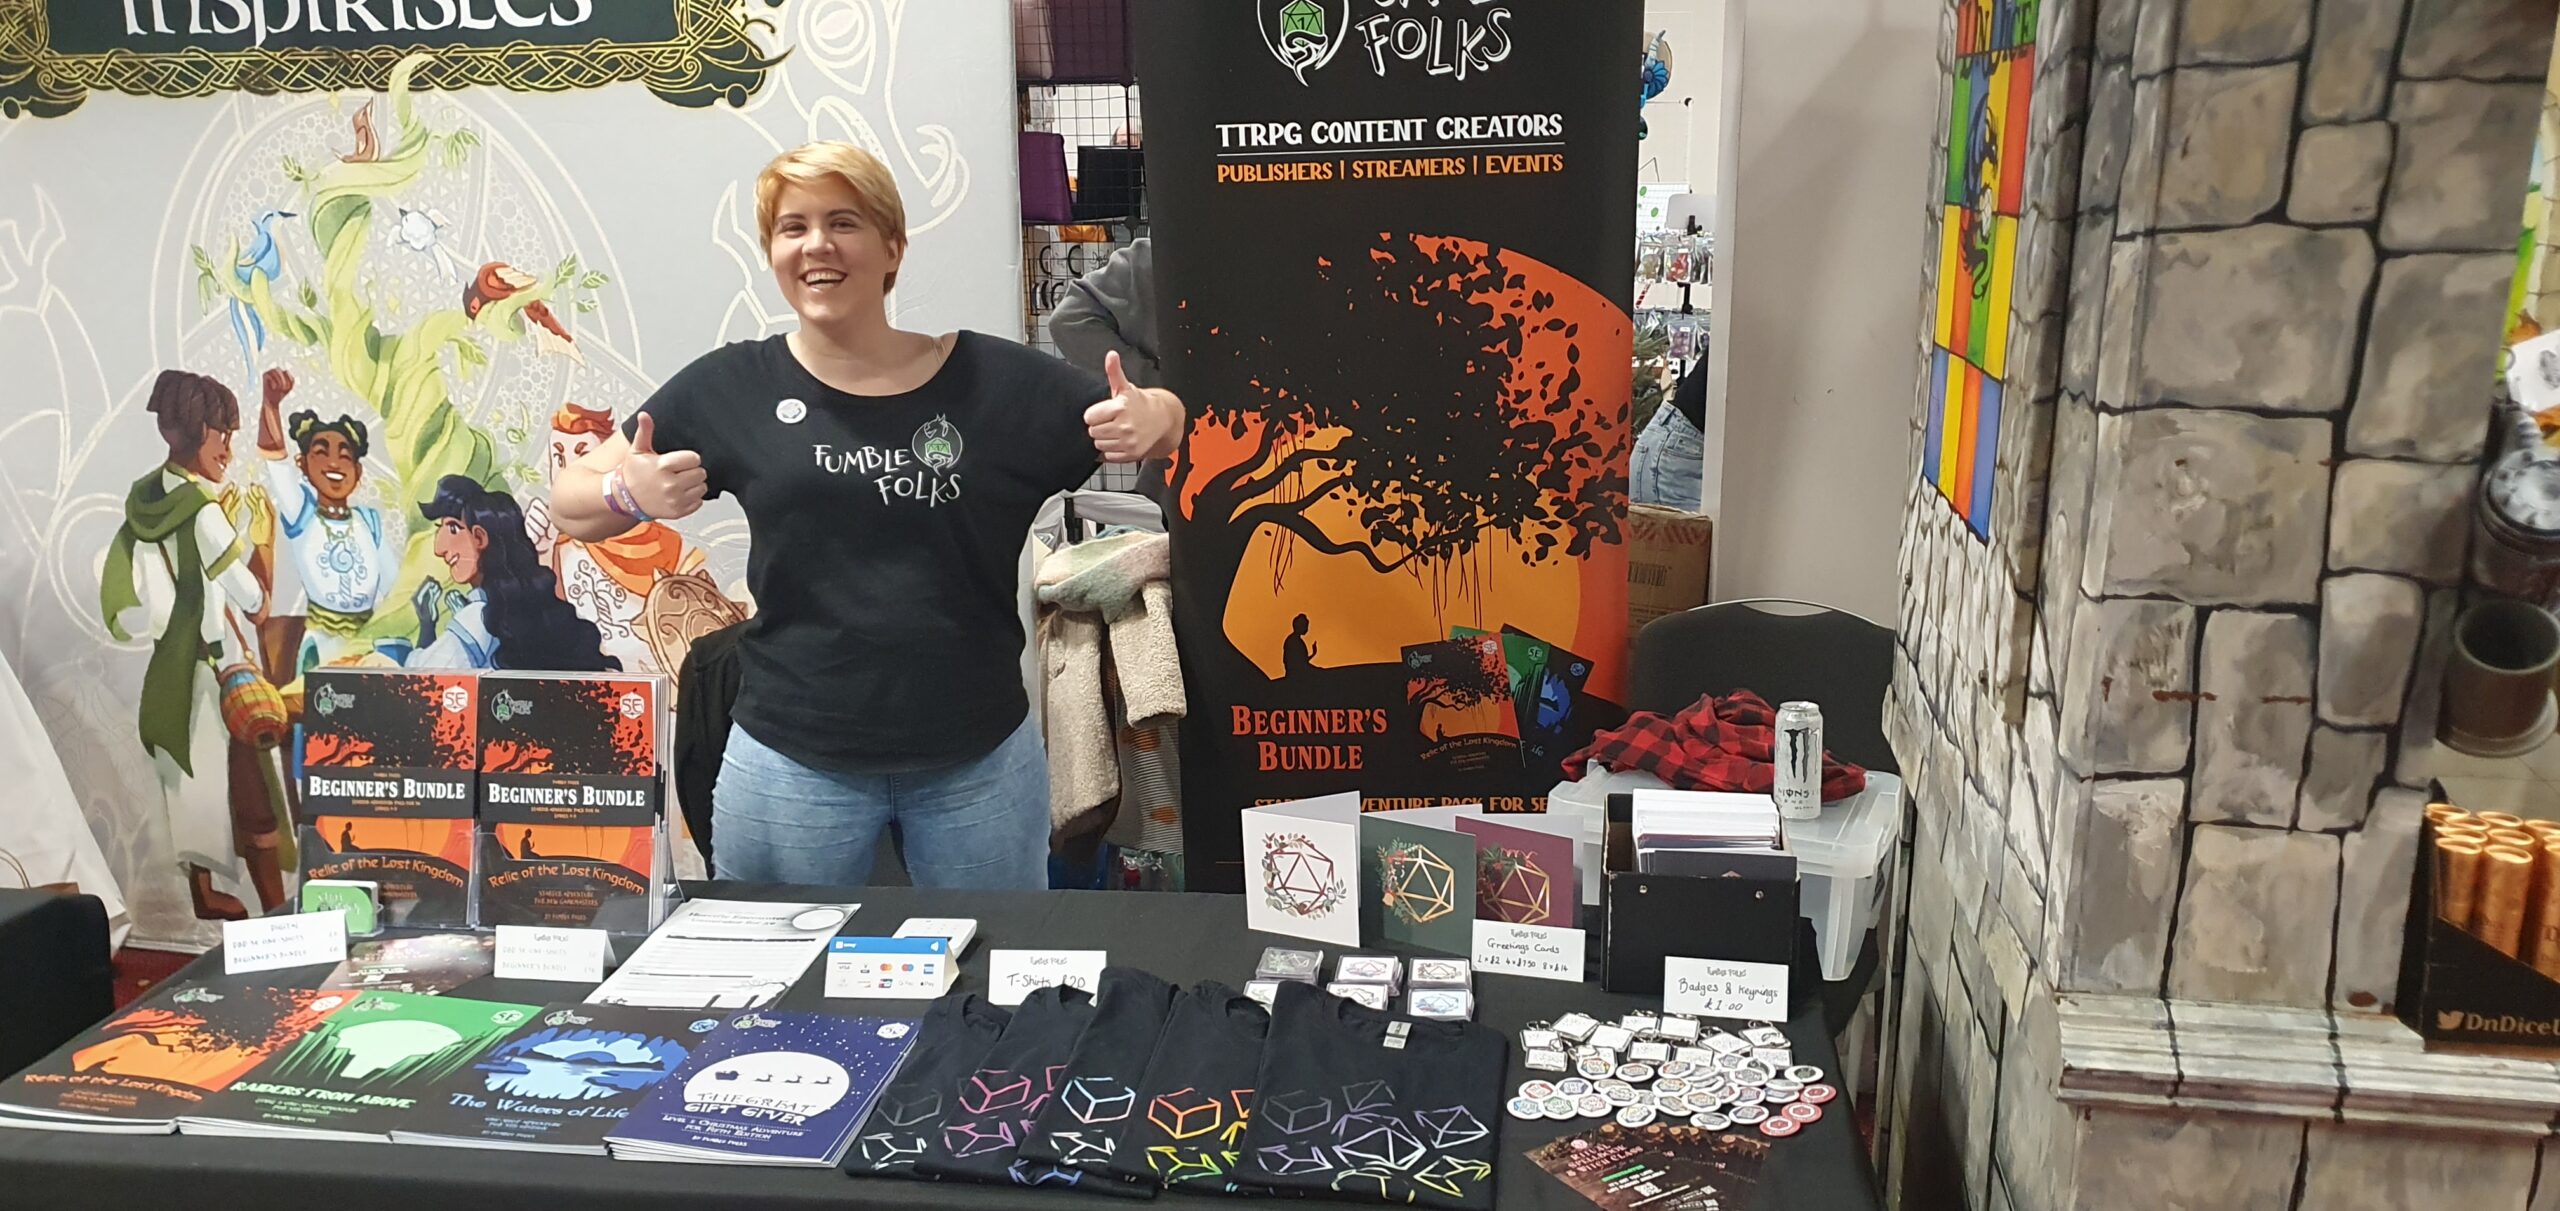 Bree, holding two thumbs up, stood behind our Dragonmeet stall, covered with our lovely merch: books, cards, tees, magnets and badges